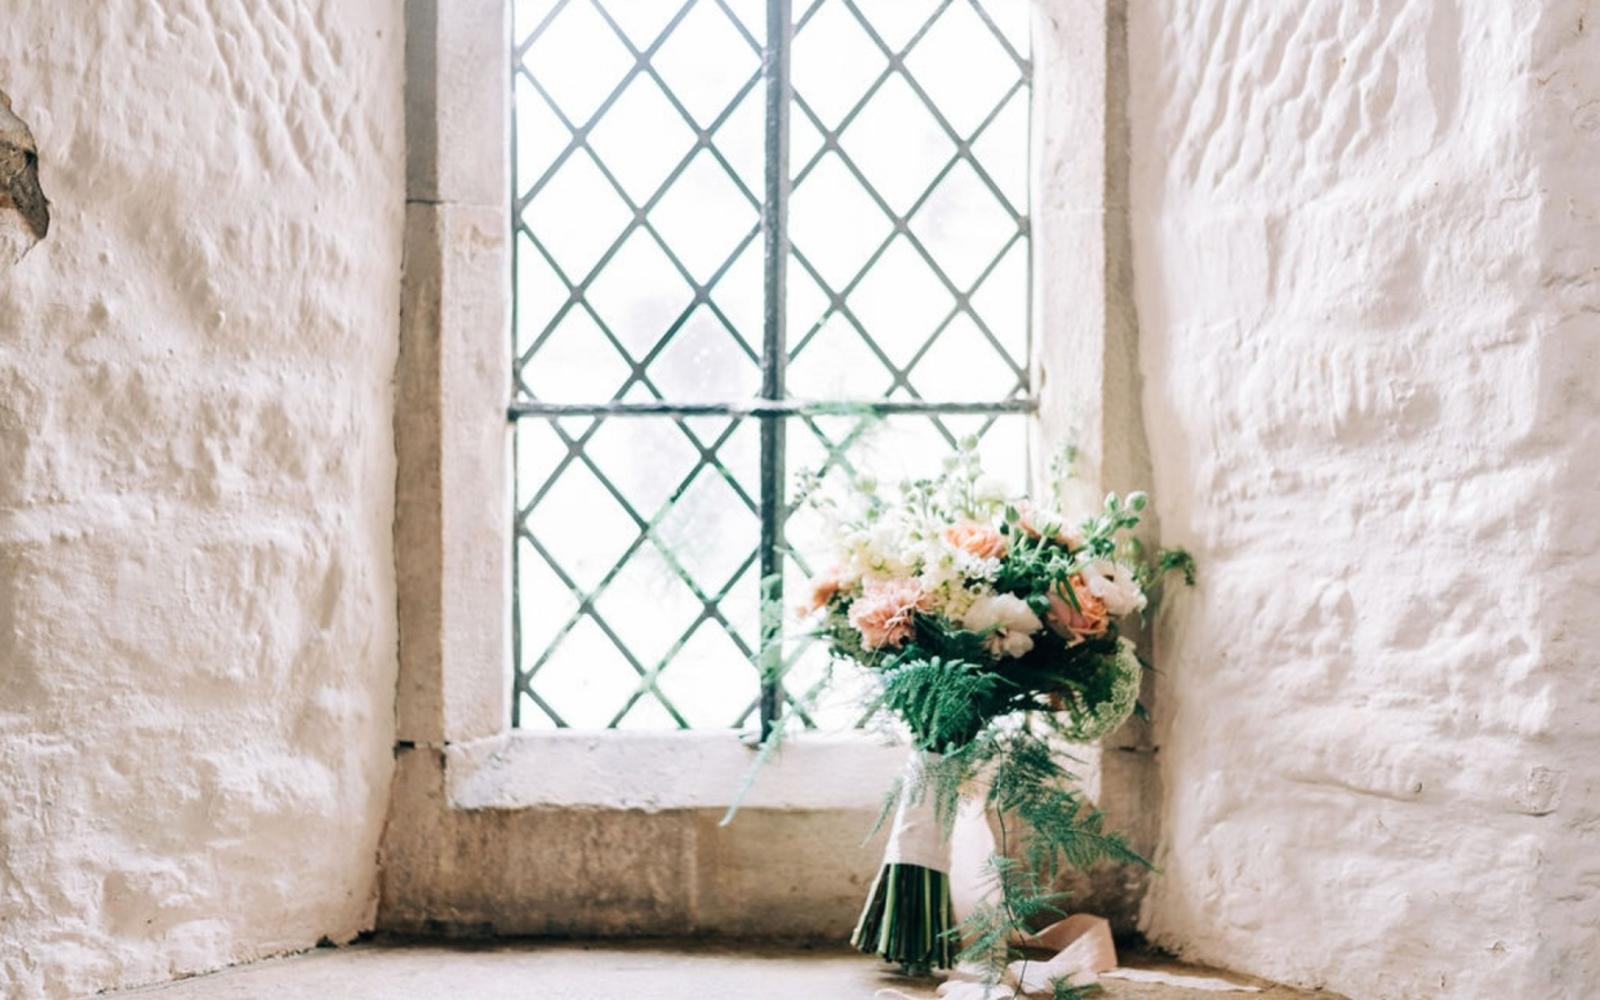 Corky and Prince Kimmi's Cakes Polly Morton Makeup Artist Dymond's Shoes and Accessories The Middle Green My eden Rachel Jane Photography styled shoot at The Royal Agricultural University wedding venue Cirencester eco-friendly artisan sustainable hand tied bridal bouquet